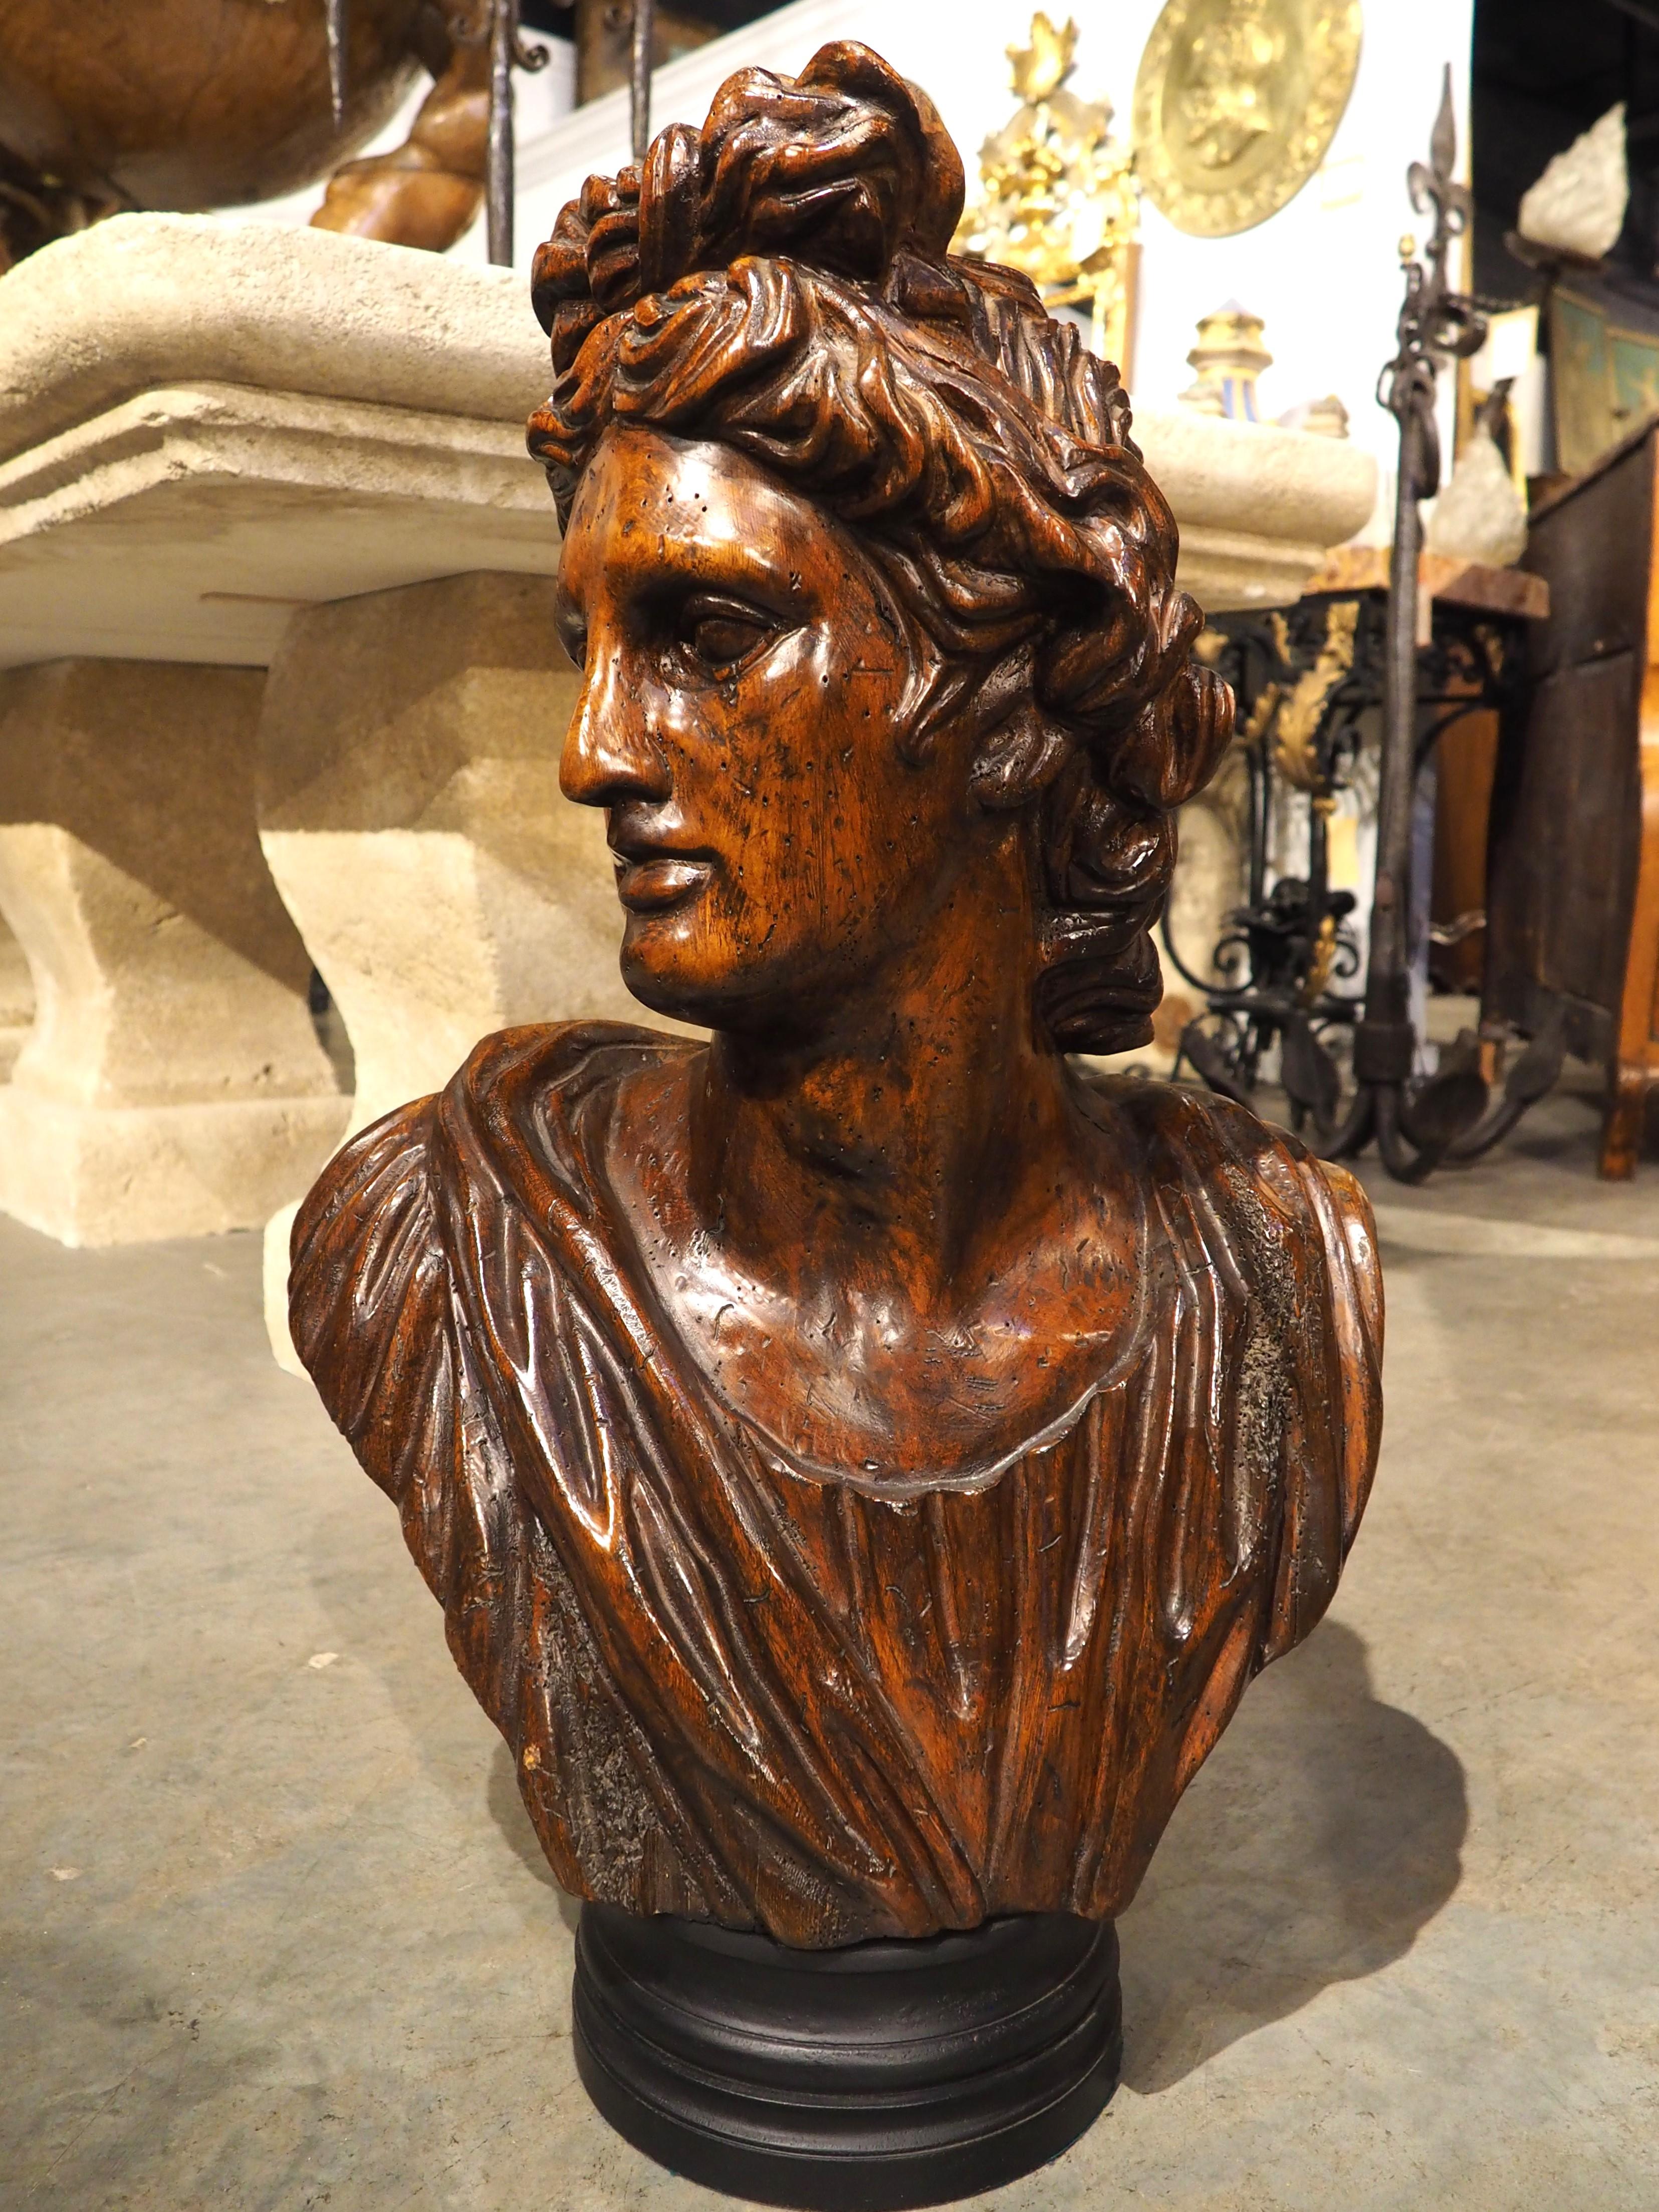 Antique Italian Wooden Bust of Apollo Belvedere, 19th Century For Sale 11